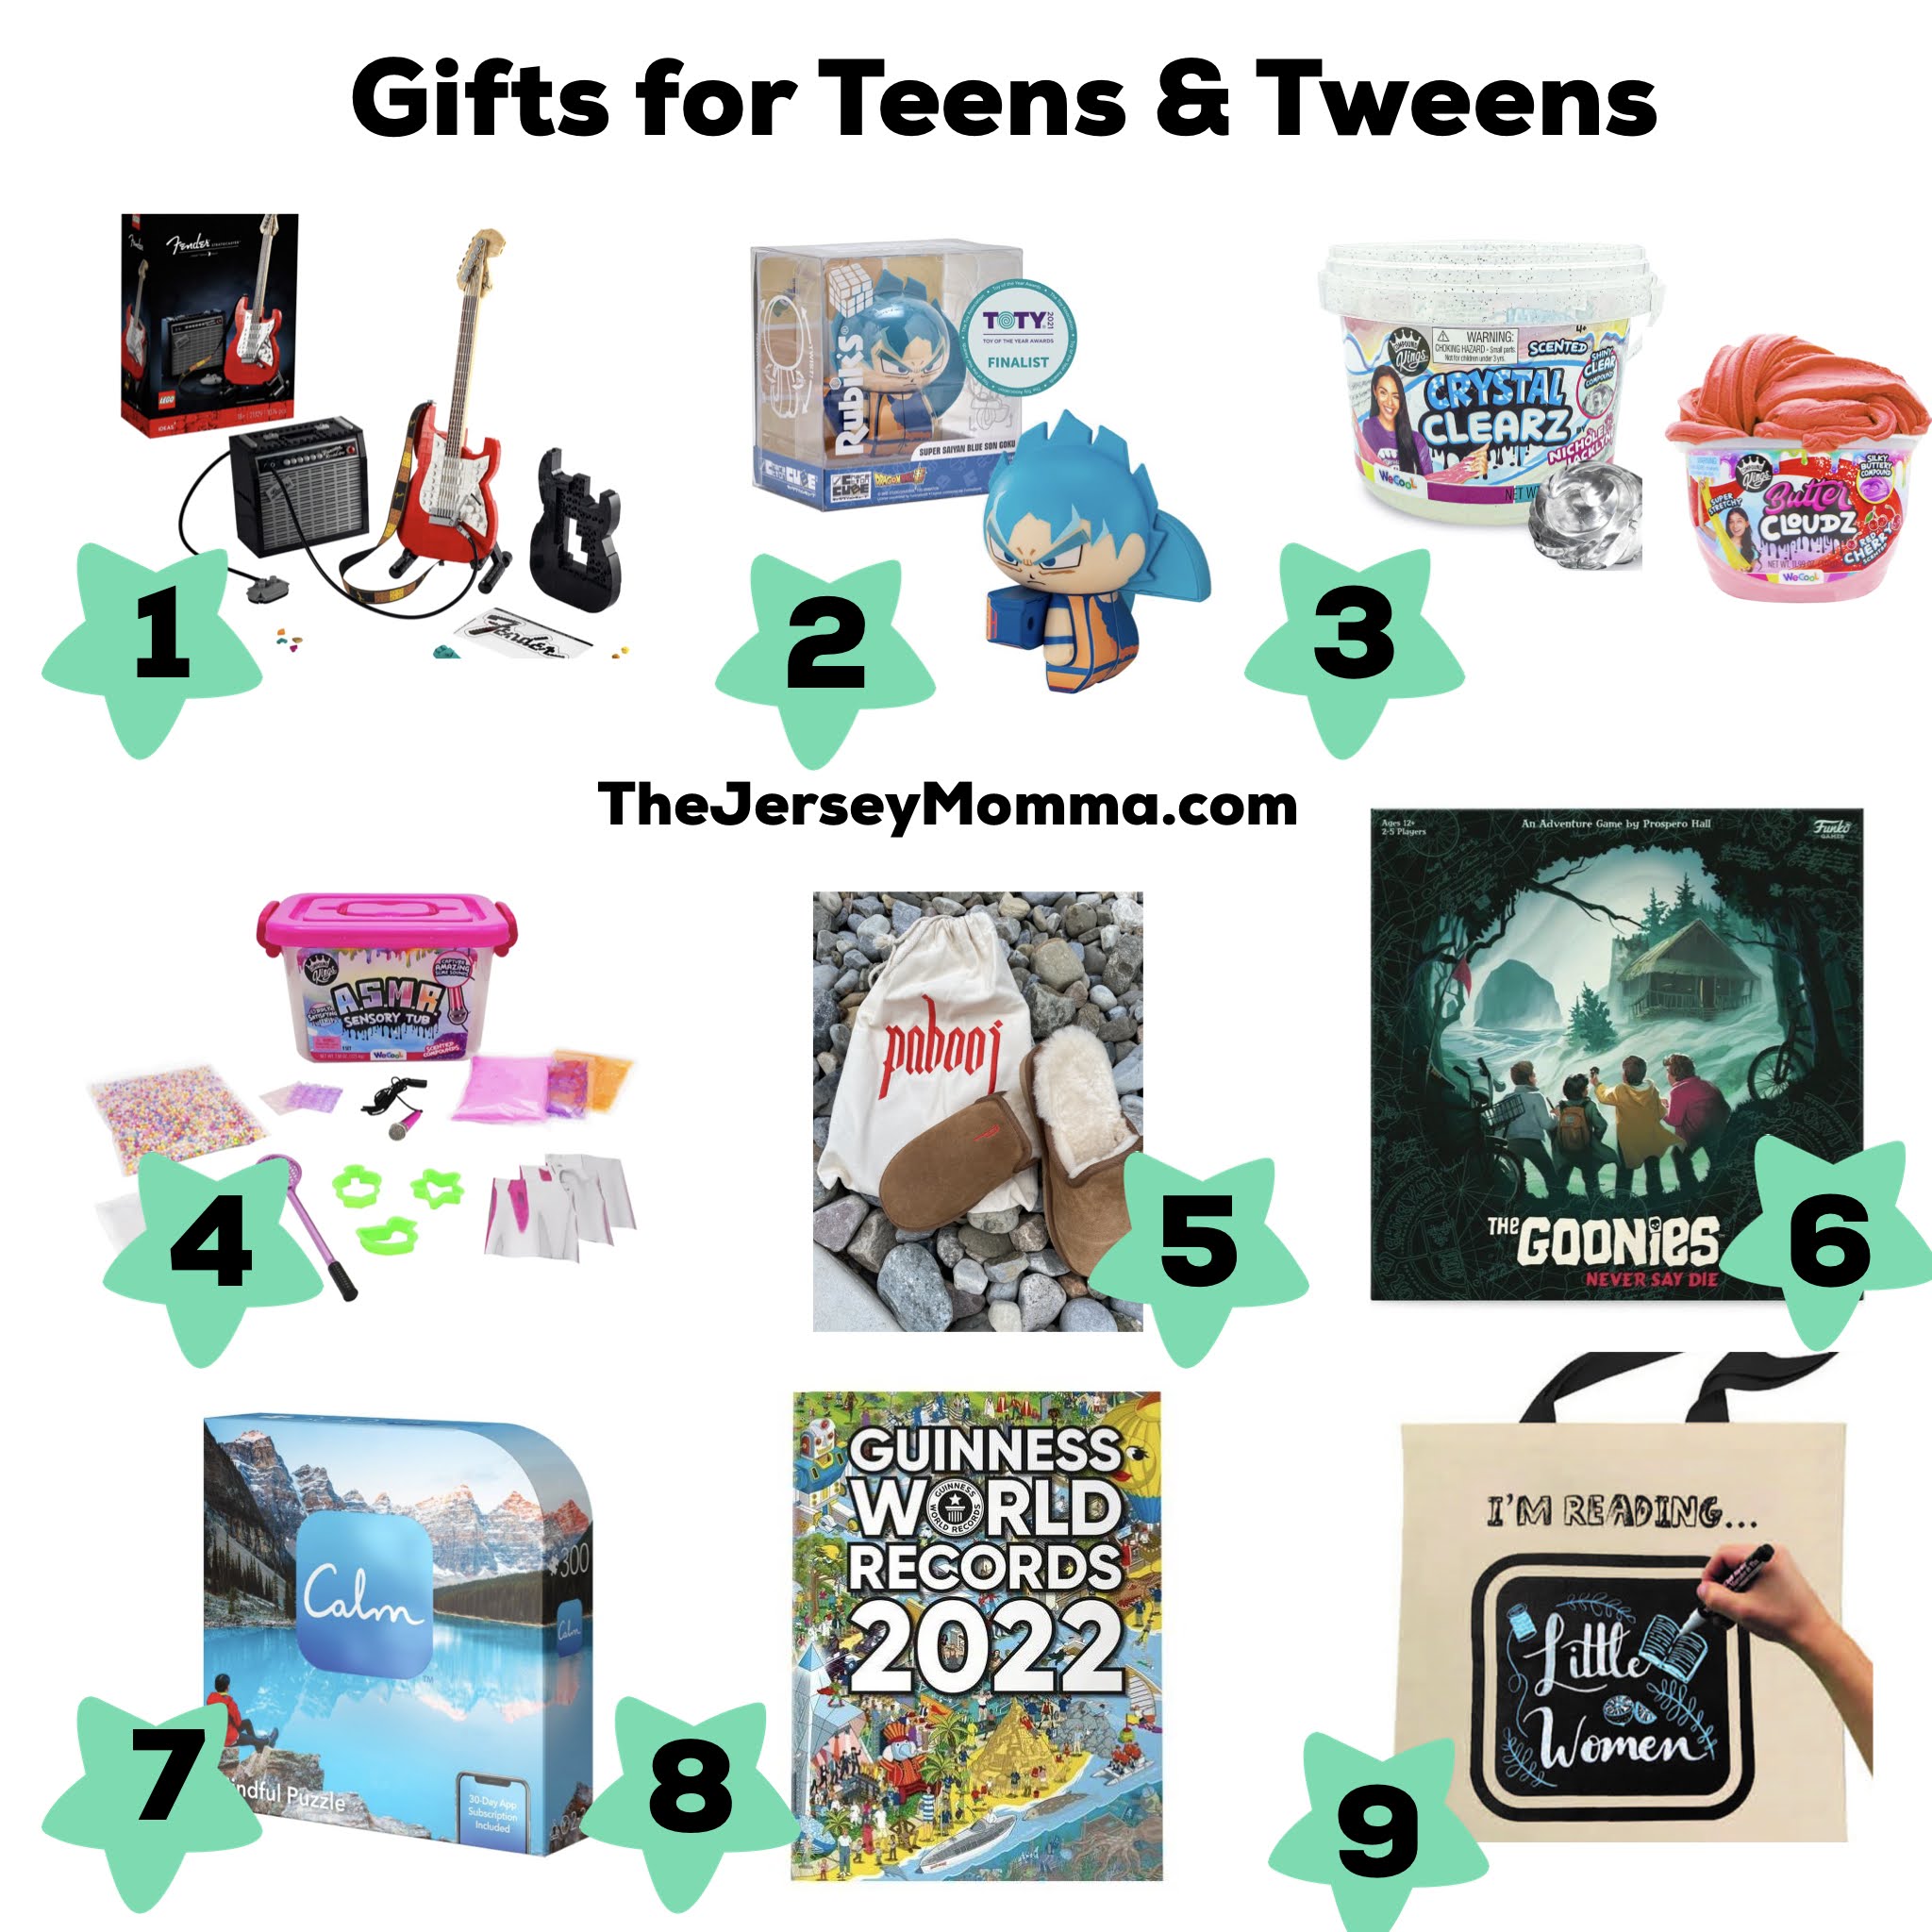 10 Crafty Gift Ideas for Tween Girls Ages 8-12 ~2017 Christmas Gift Guide -  Daily Dose of DIY